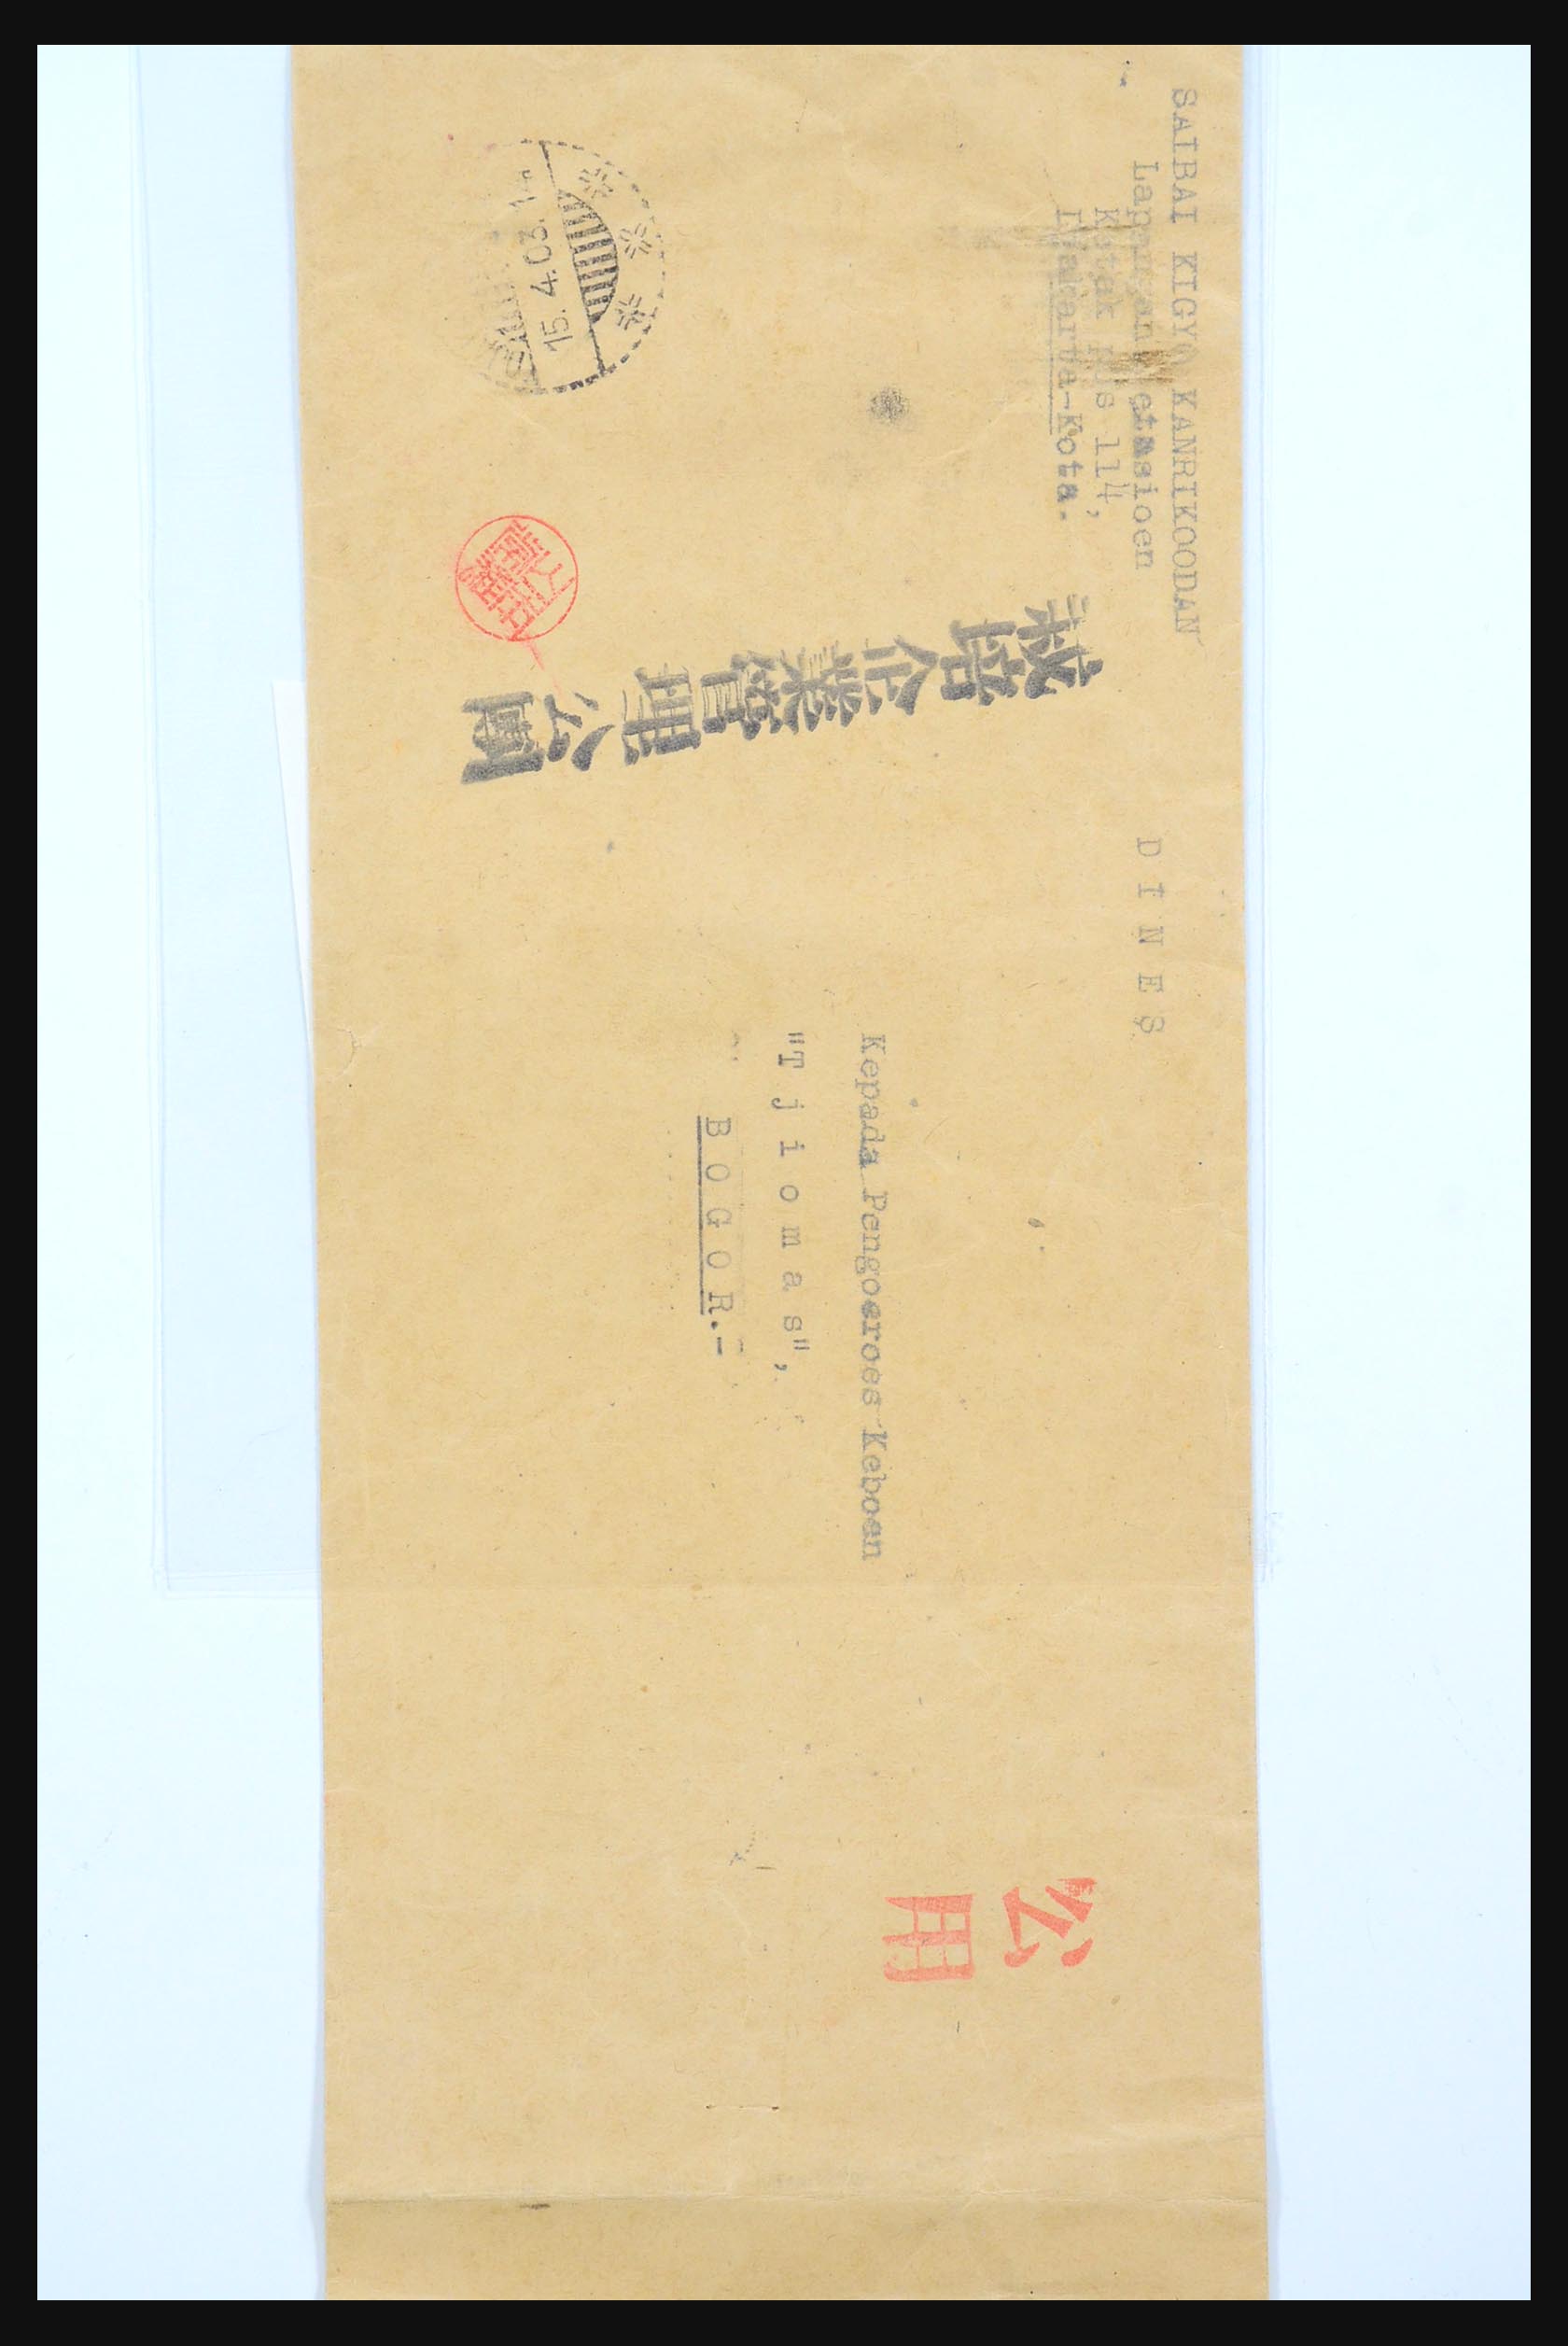 31362 064 - 31362 Netherlands Indies Japanese occupation covers 1942-1945.